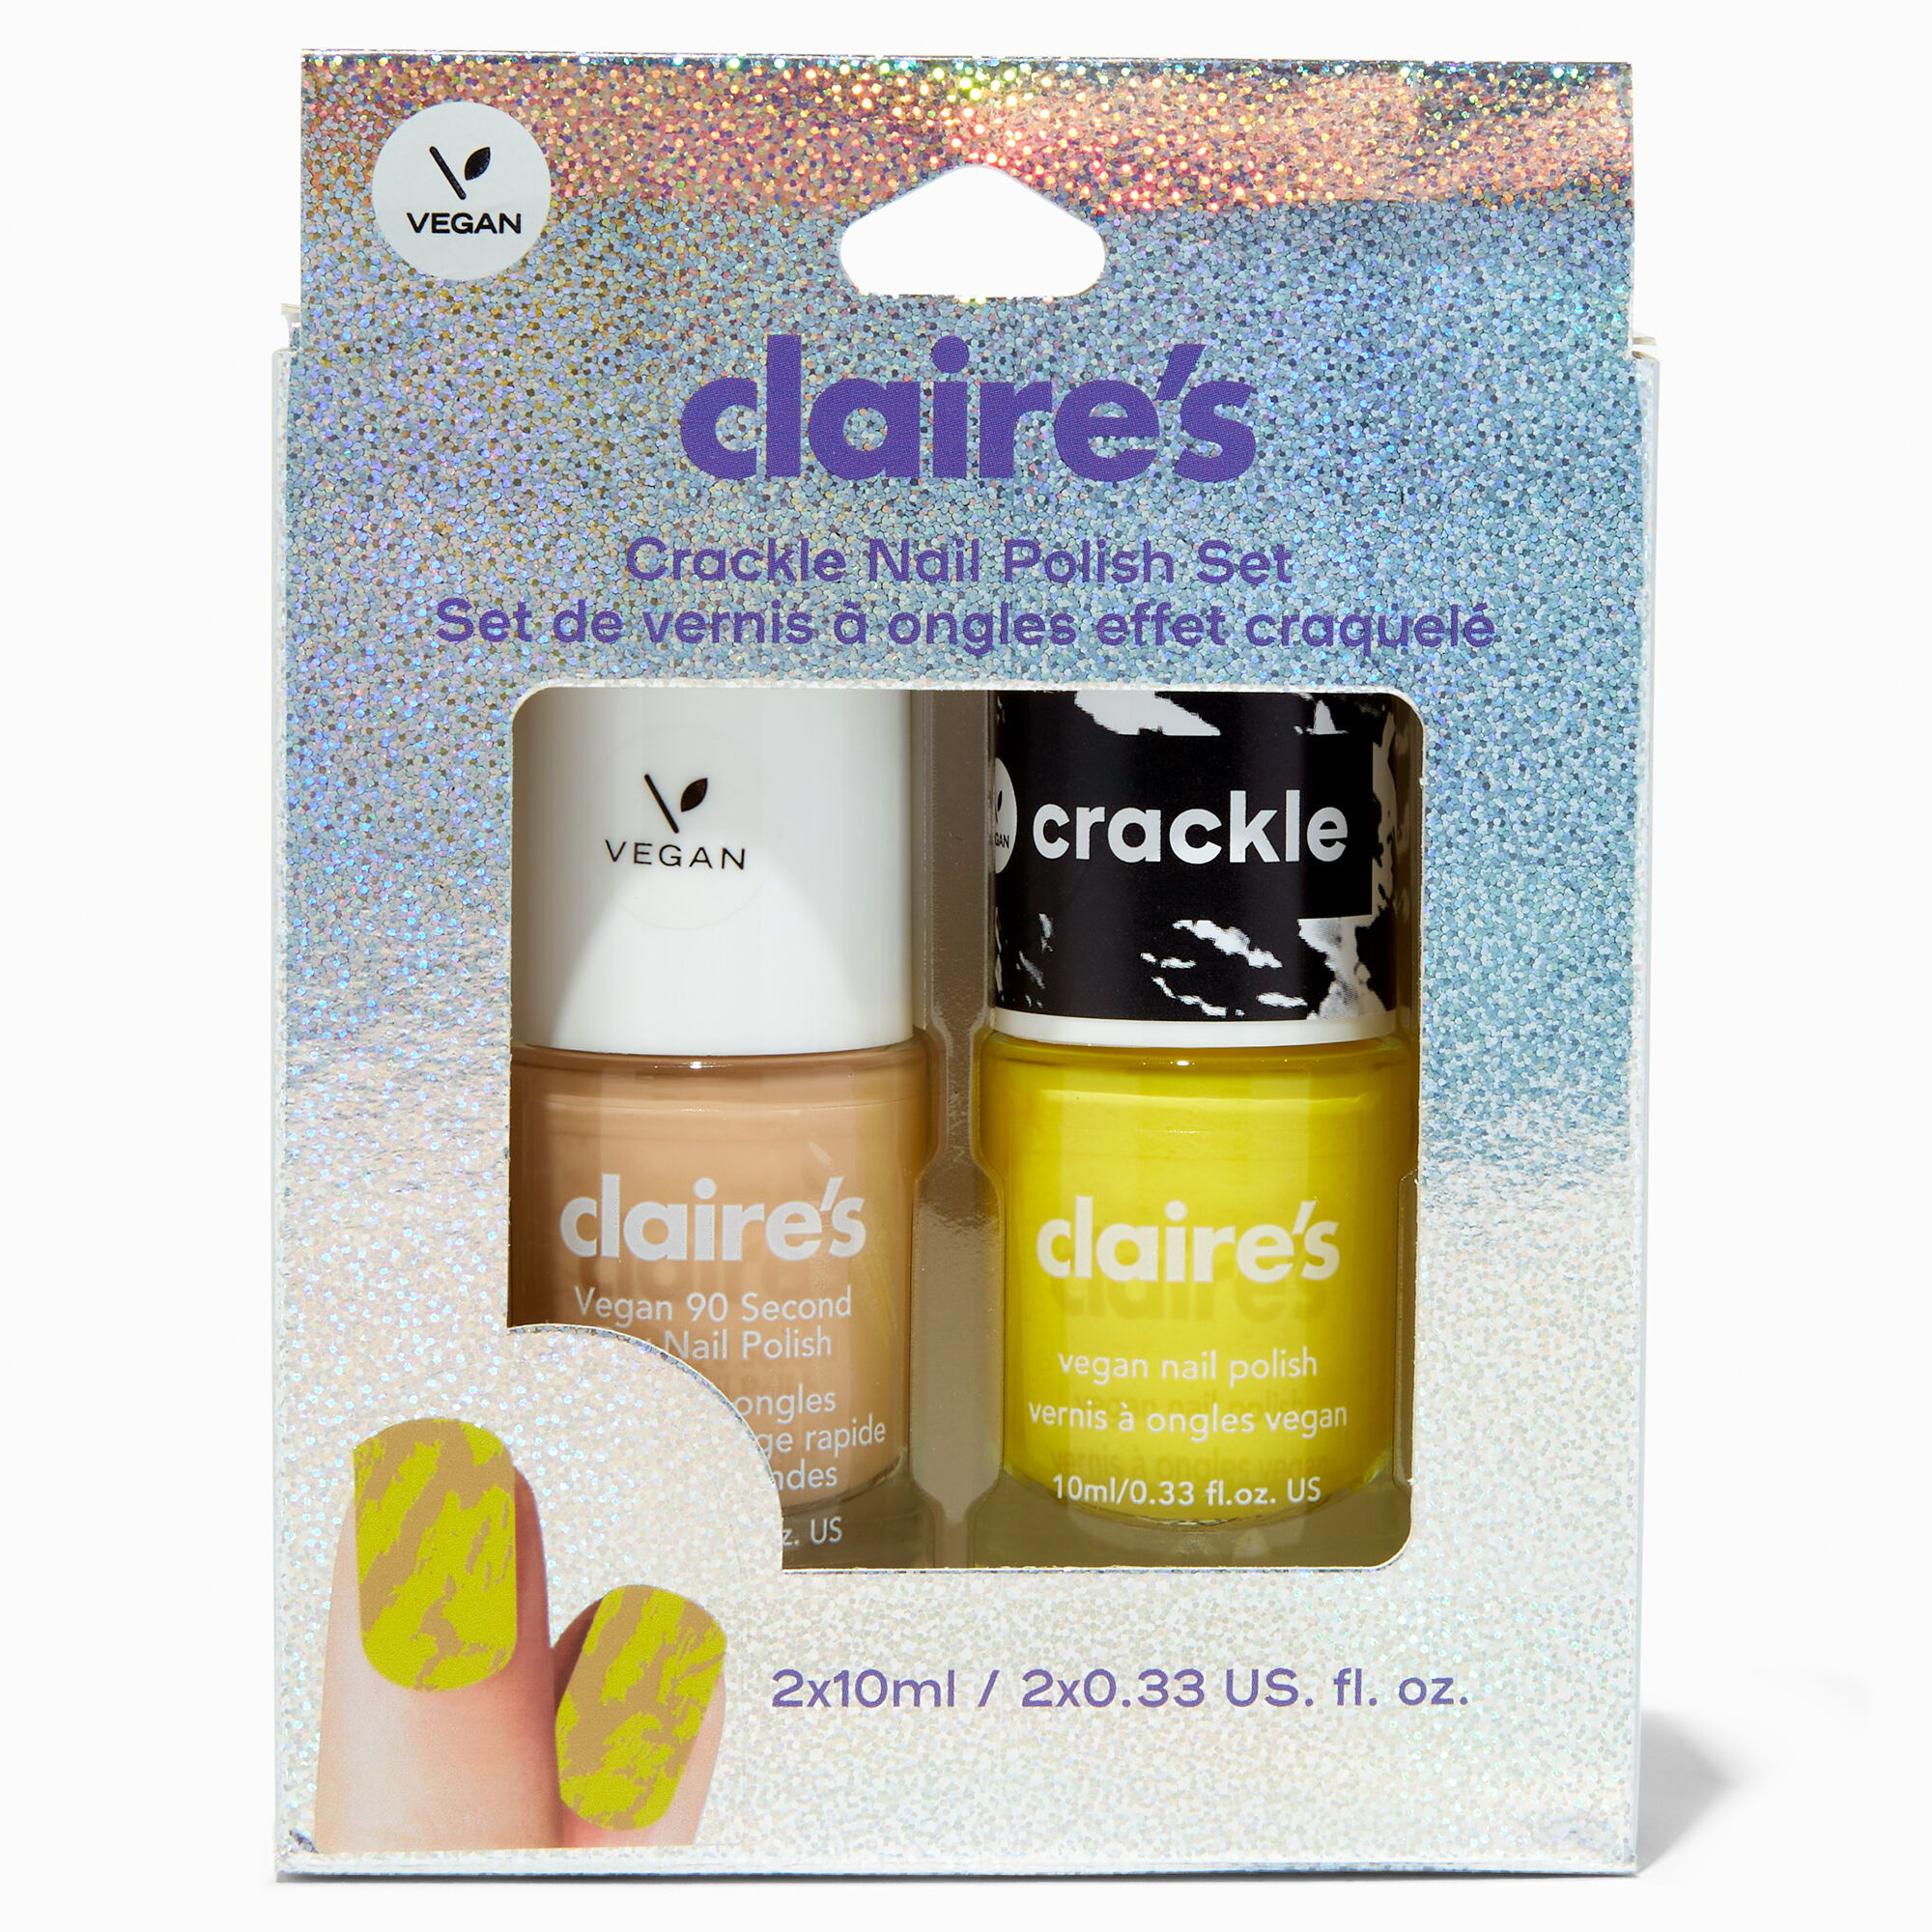 View Claires Nude Crackle Vegan Nail Polish Set 2 Pack Yellow information